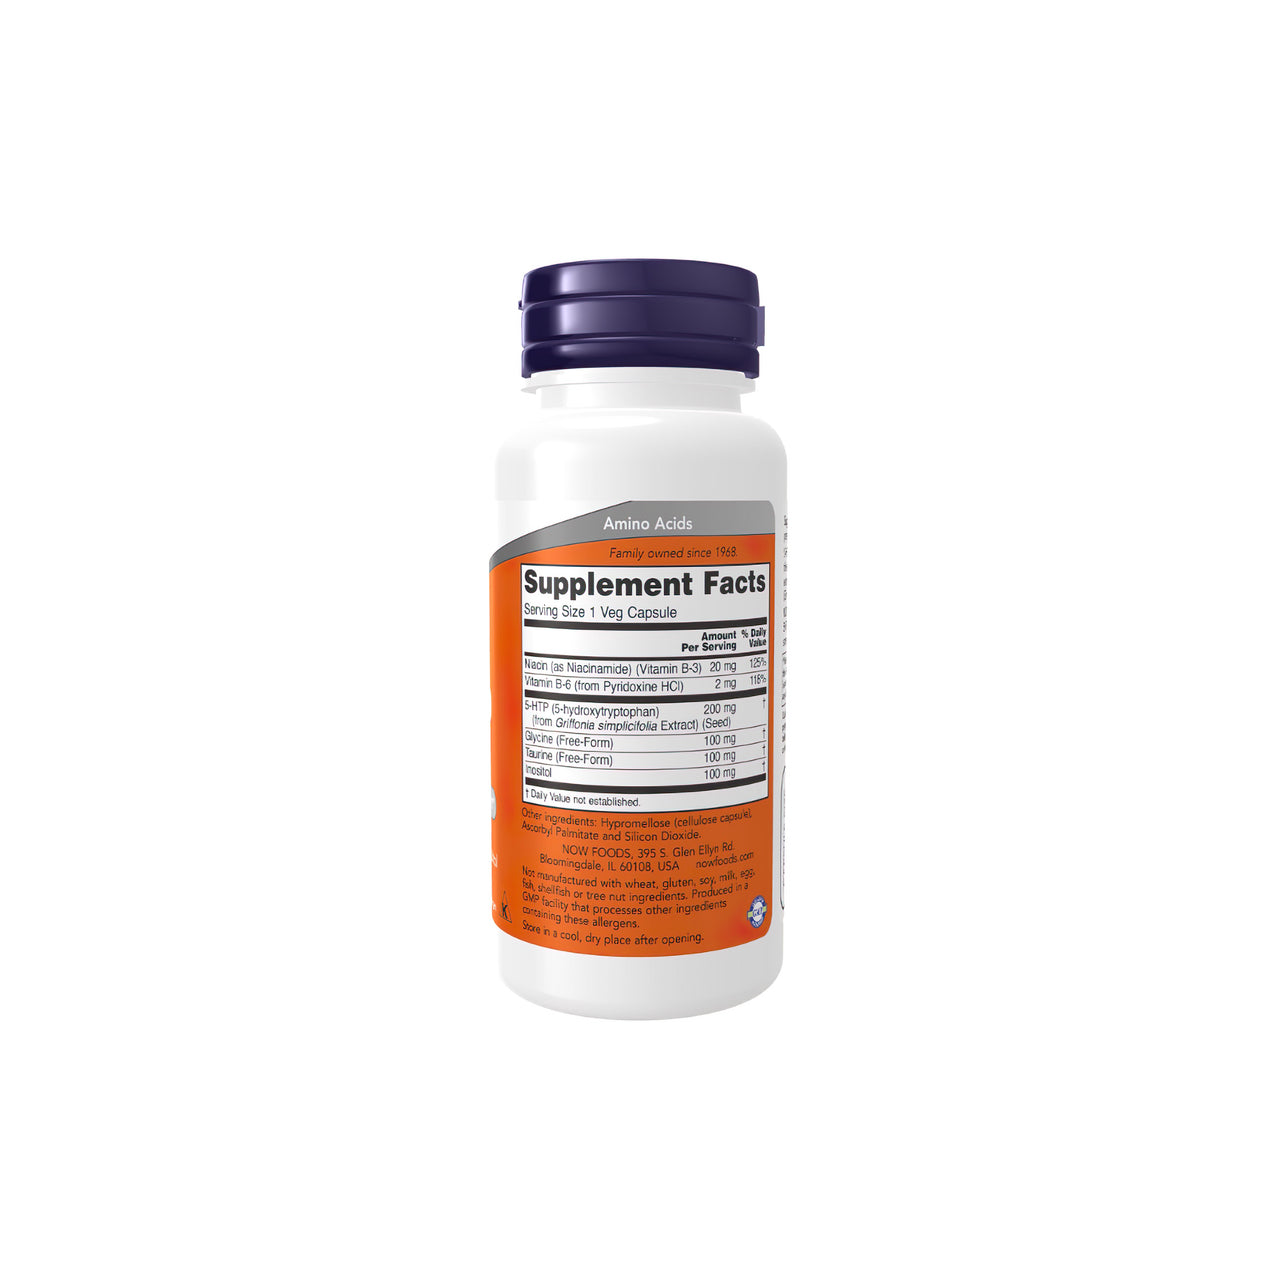 A bottle of Now Foods 5-HTP 200mg 120 veg caps on a white background.